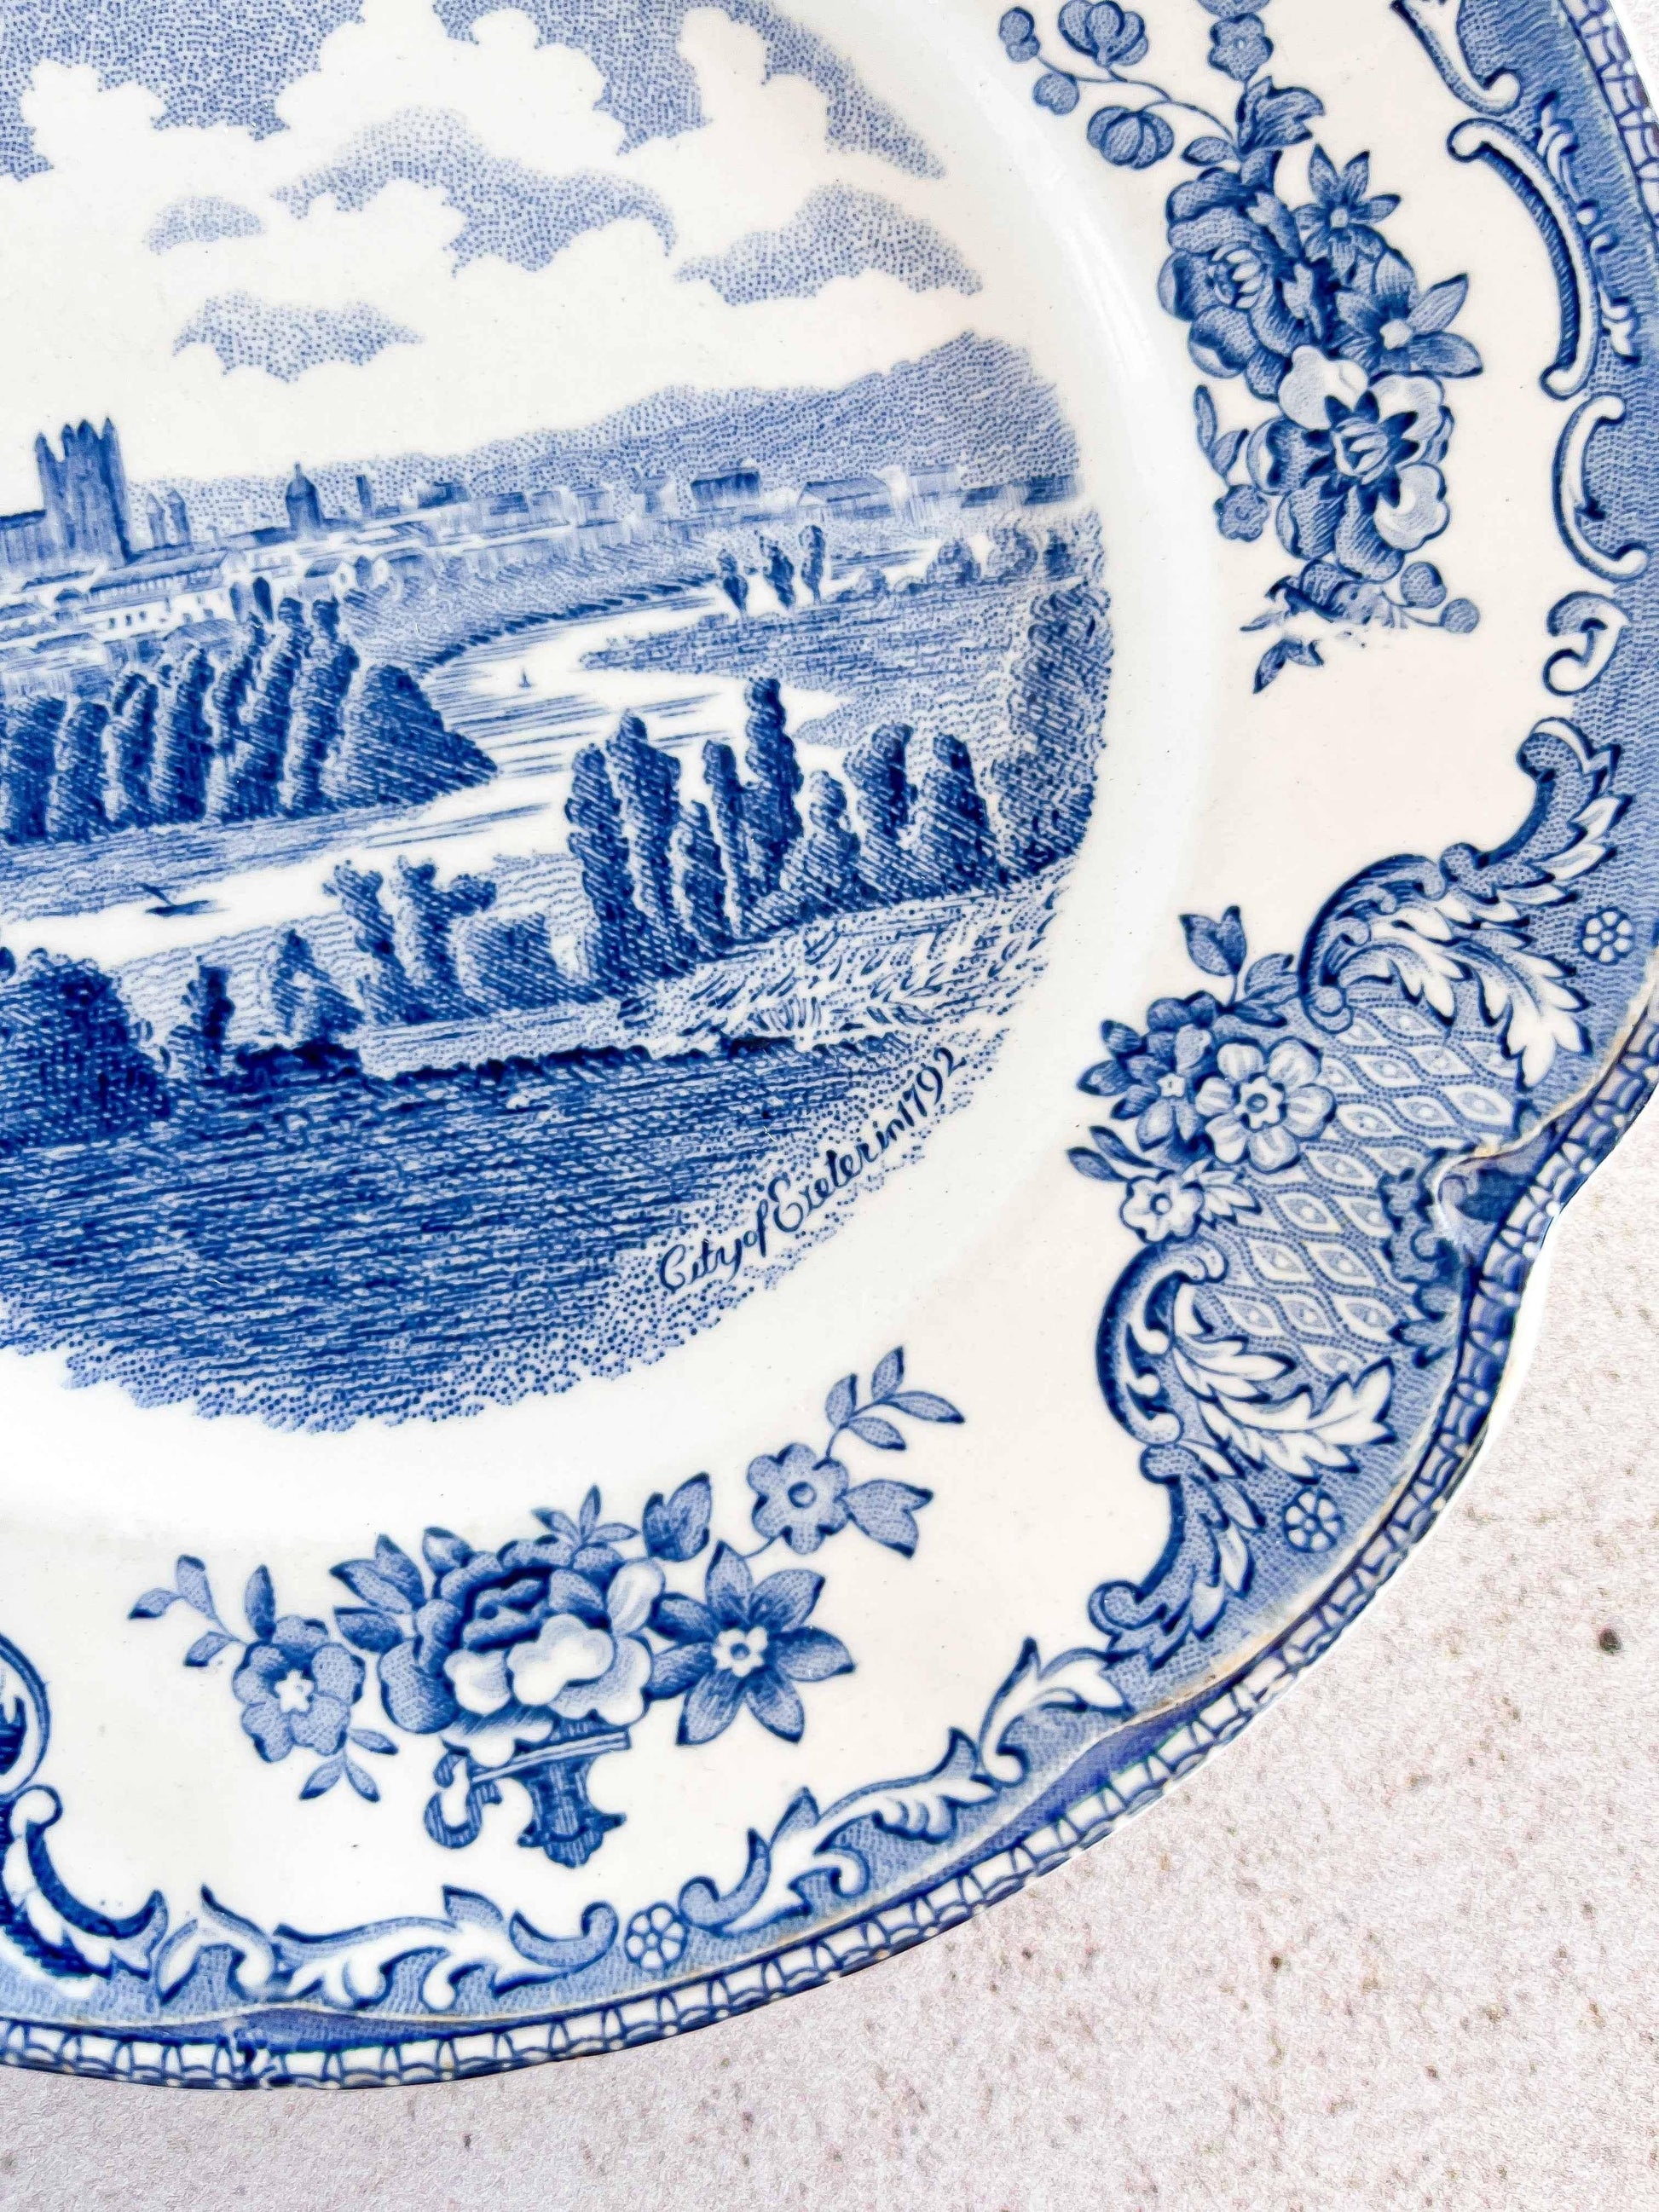 Johnson Bros Salad Plate - Old Britain Castles, City of Exeter 1792 - SOSC Home